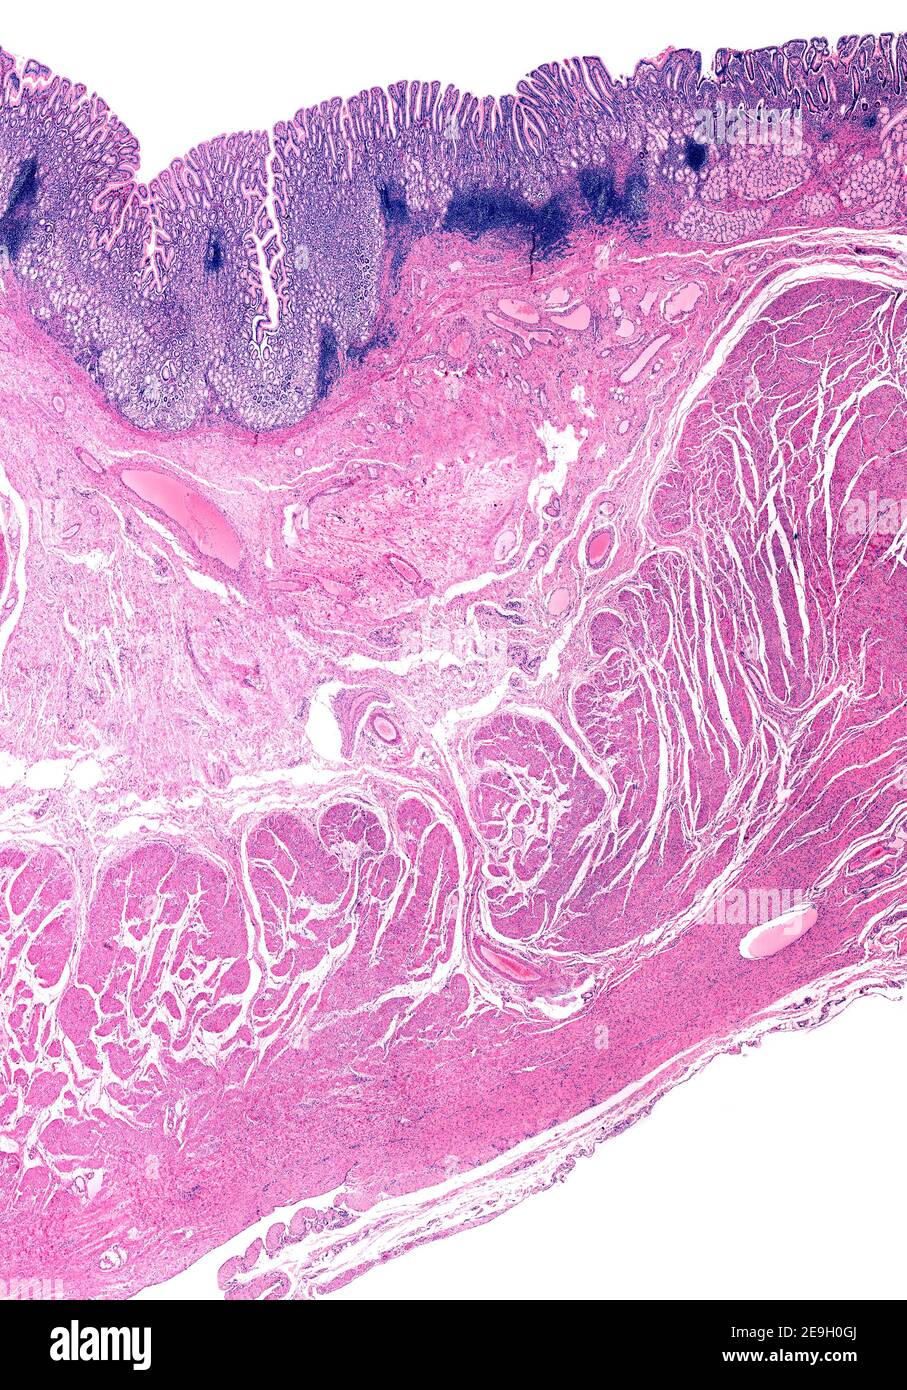 Pylorus. Transition between the gastric mucosa of the pyloric antrum (left) and duodenum (right) which show Brunner glands. Below, pyloric sphincter Stock Photo